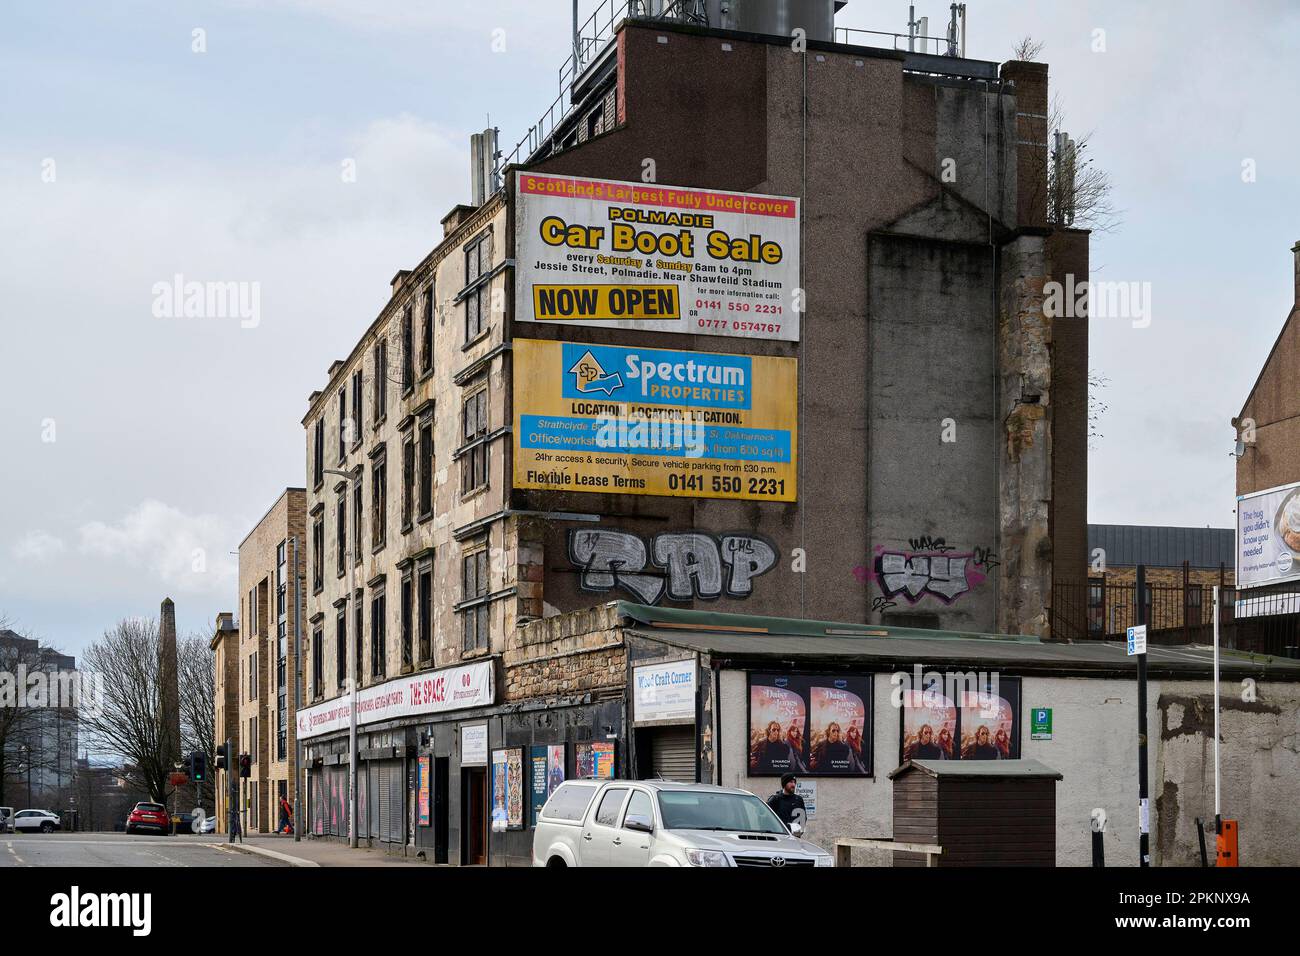 The east end of Glasgow off London road, near The Barras, central Scotland, UK Stock Photo